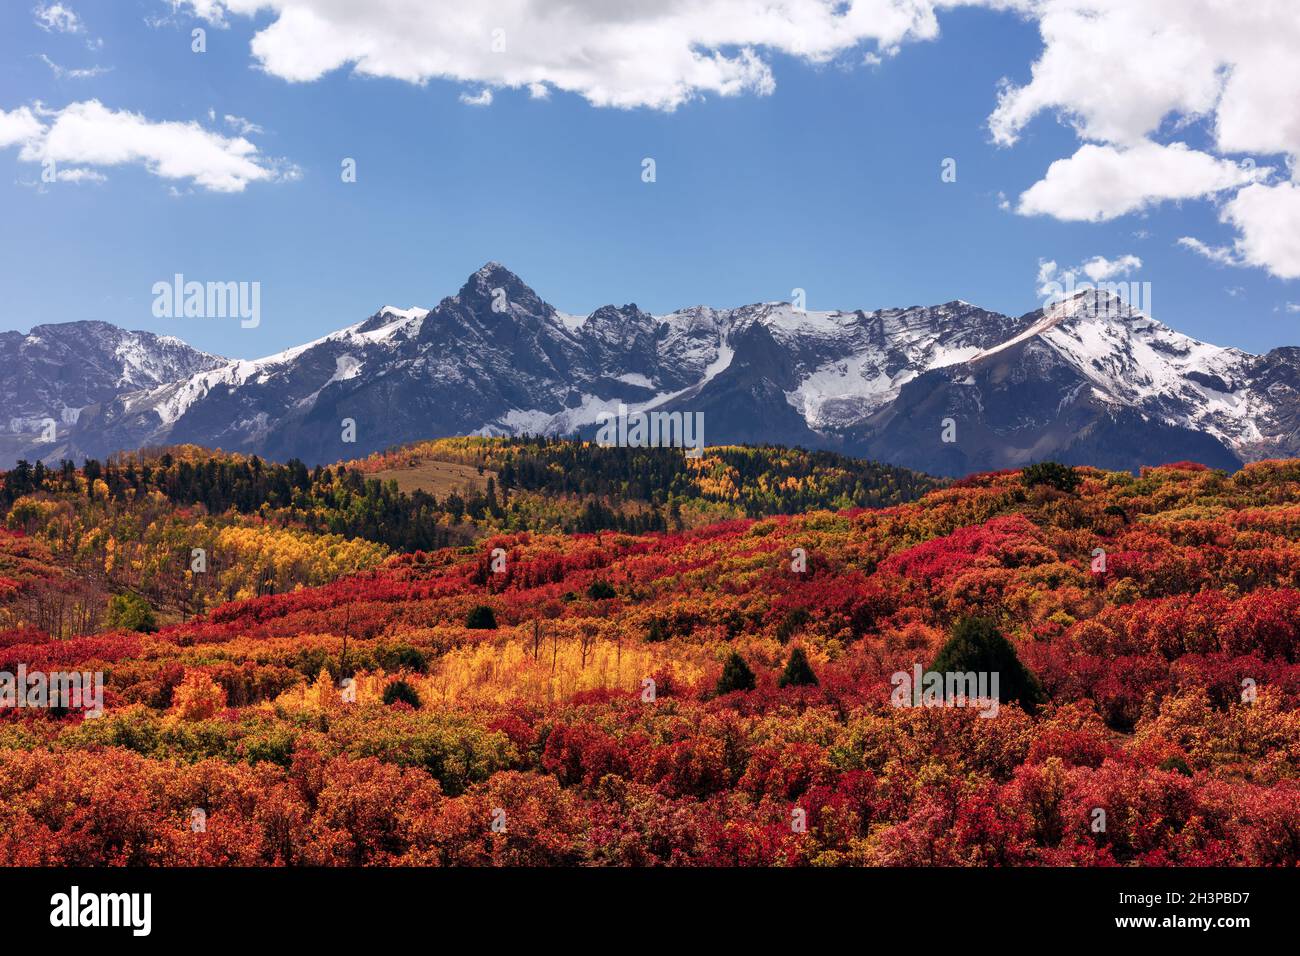 Autumn landscape with vibrant fall colors at Dallas Divide in the San Juan Mountains near Ridgway, Colorado. Stock Photo